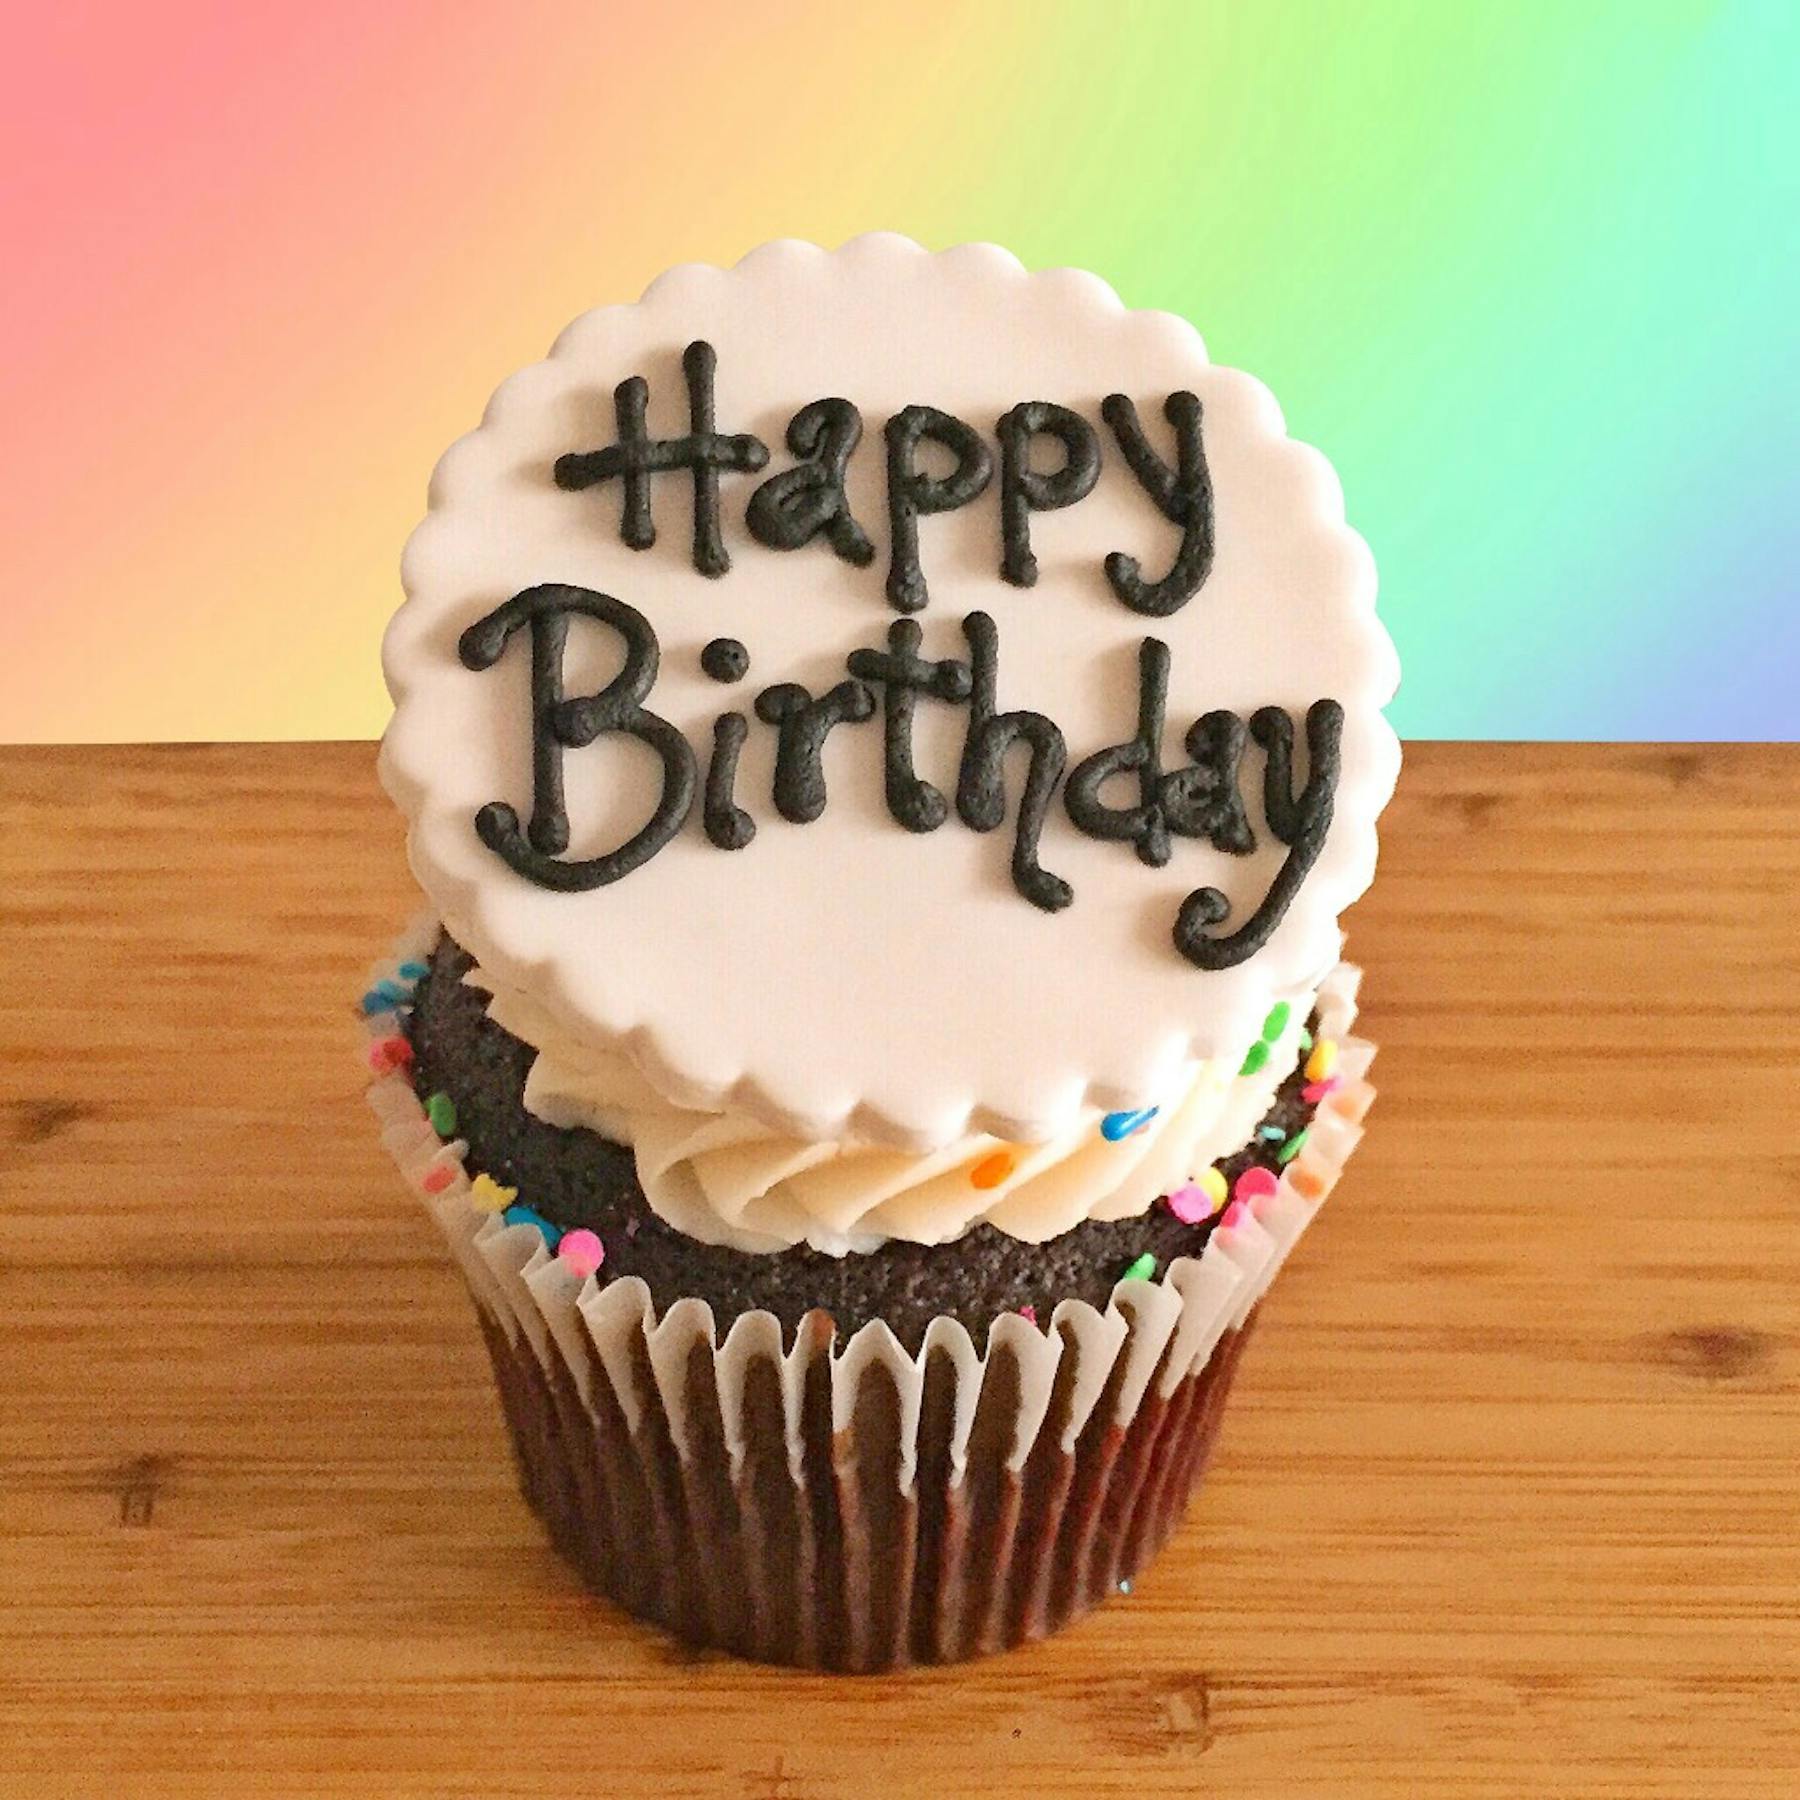 https://images.getbento.com/accounts/1ab3970be3142a531fb4410a4d447fe6/media/M7jzgvrlQm9IQxVnOxSP_happy%20birthday%20giant%20cupcake%20with%20fondant%20disc.jpg?w=1800&fit=max&auto=compress,format&h=1800